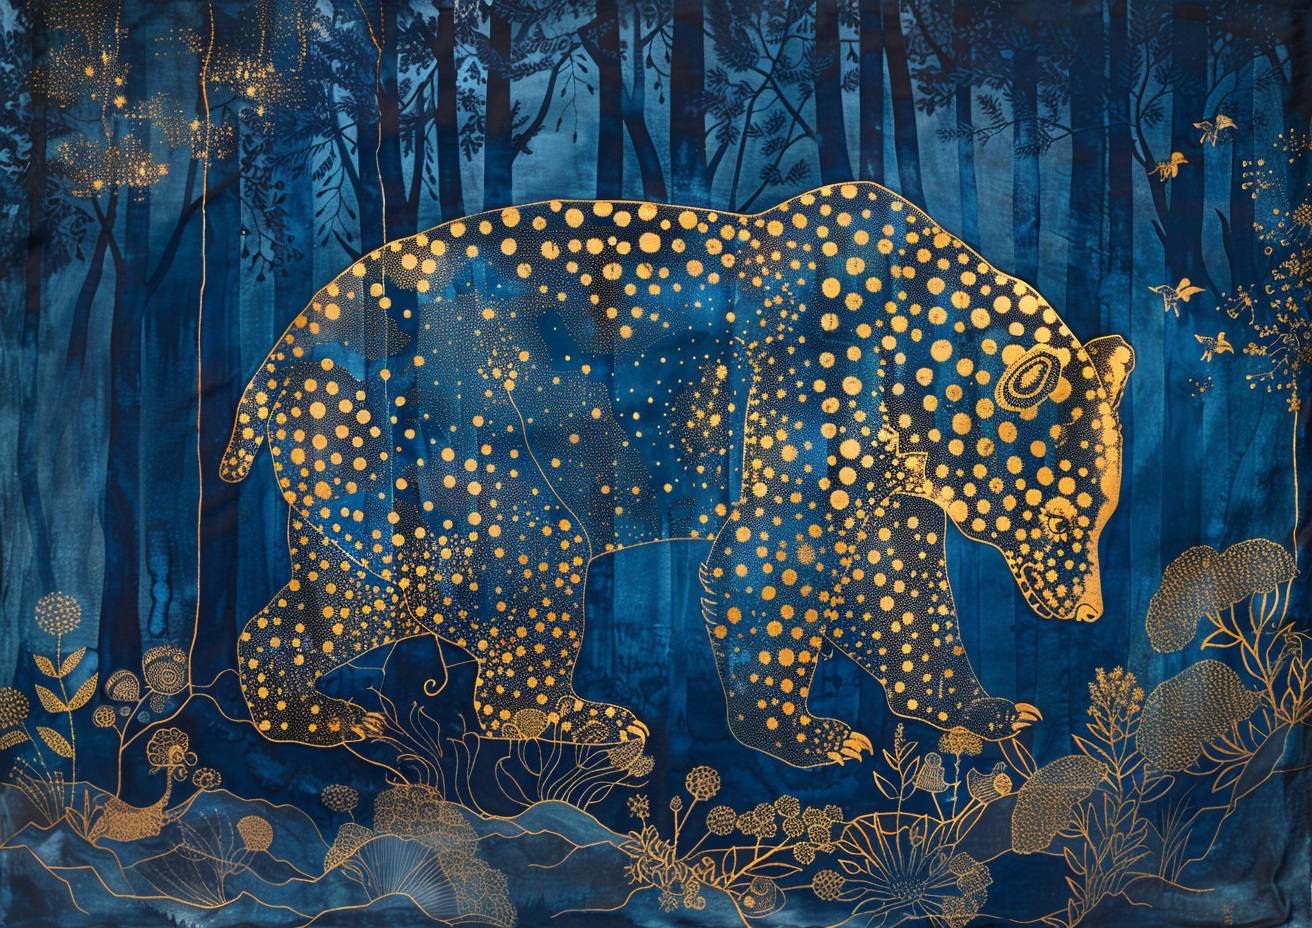 Ink wash painting on batik silk, a mighty bear in an enchanted forest, formed from phosphor dots in gold and blue, in the style of Gond art, intricate details, tenebrism, glowing radiant colours, strong visual flow